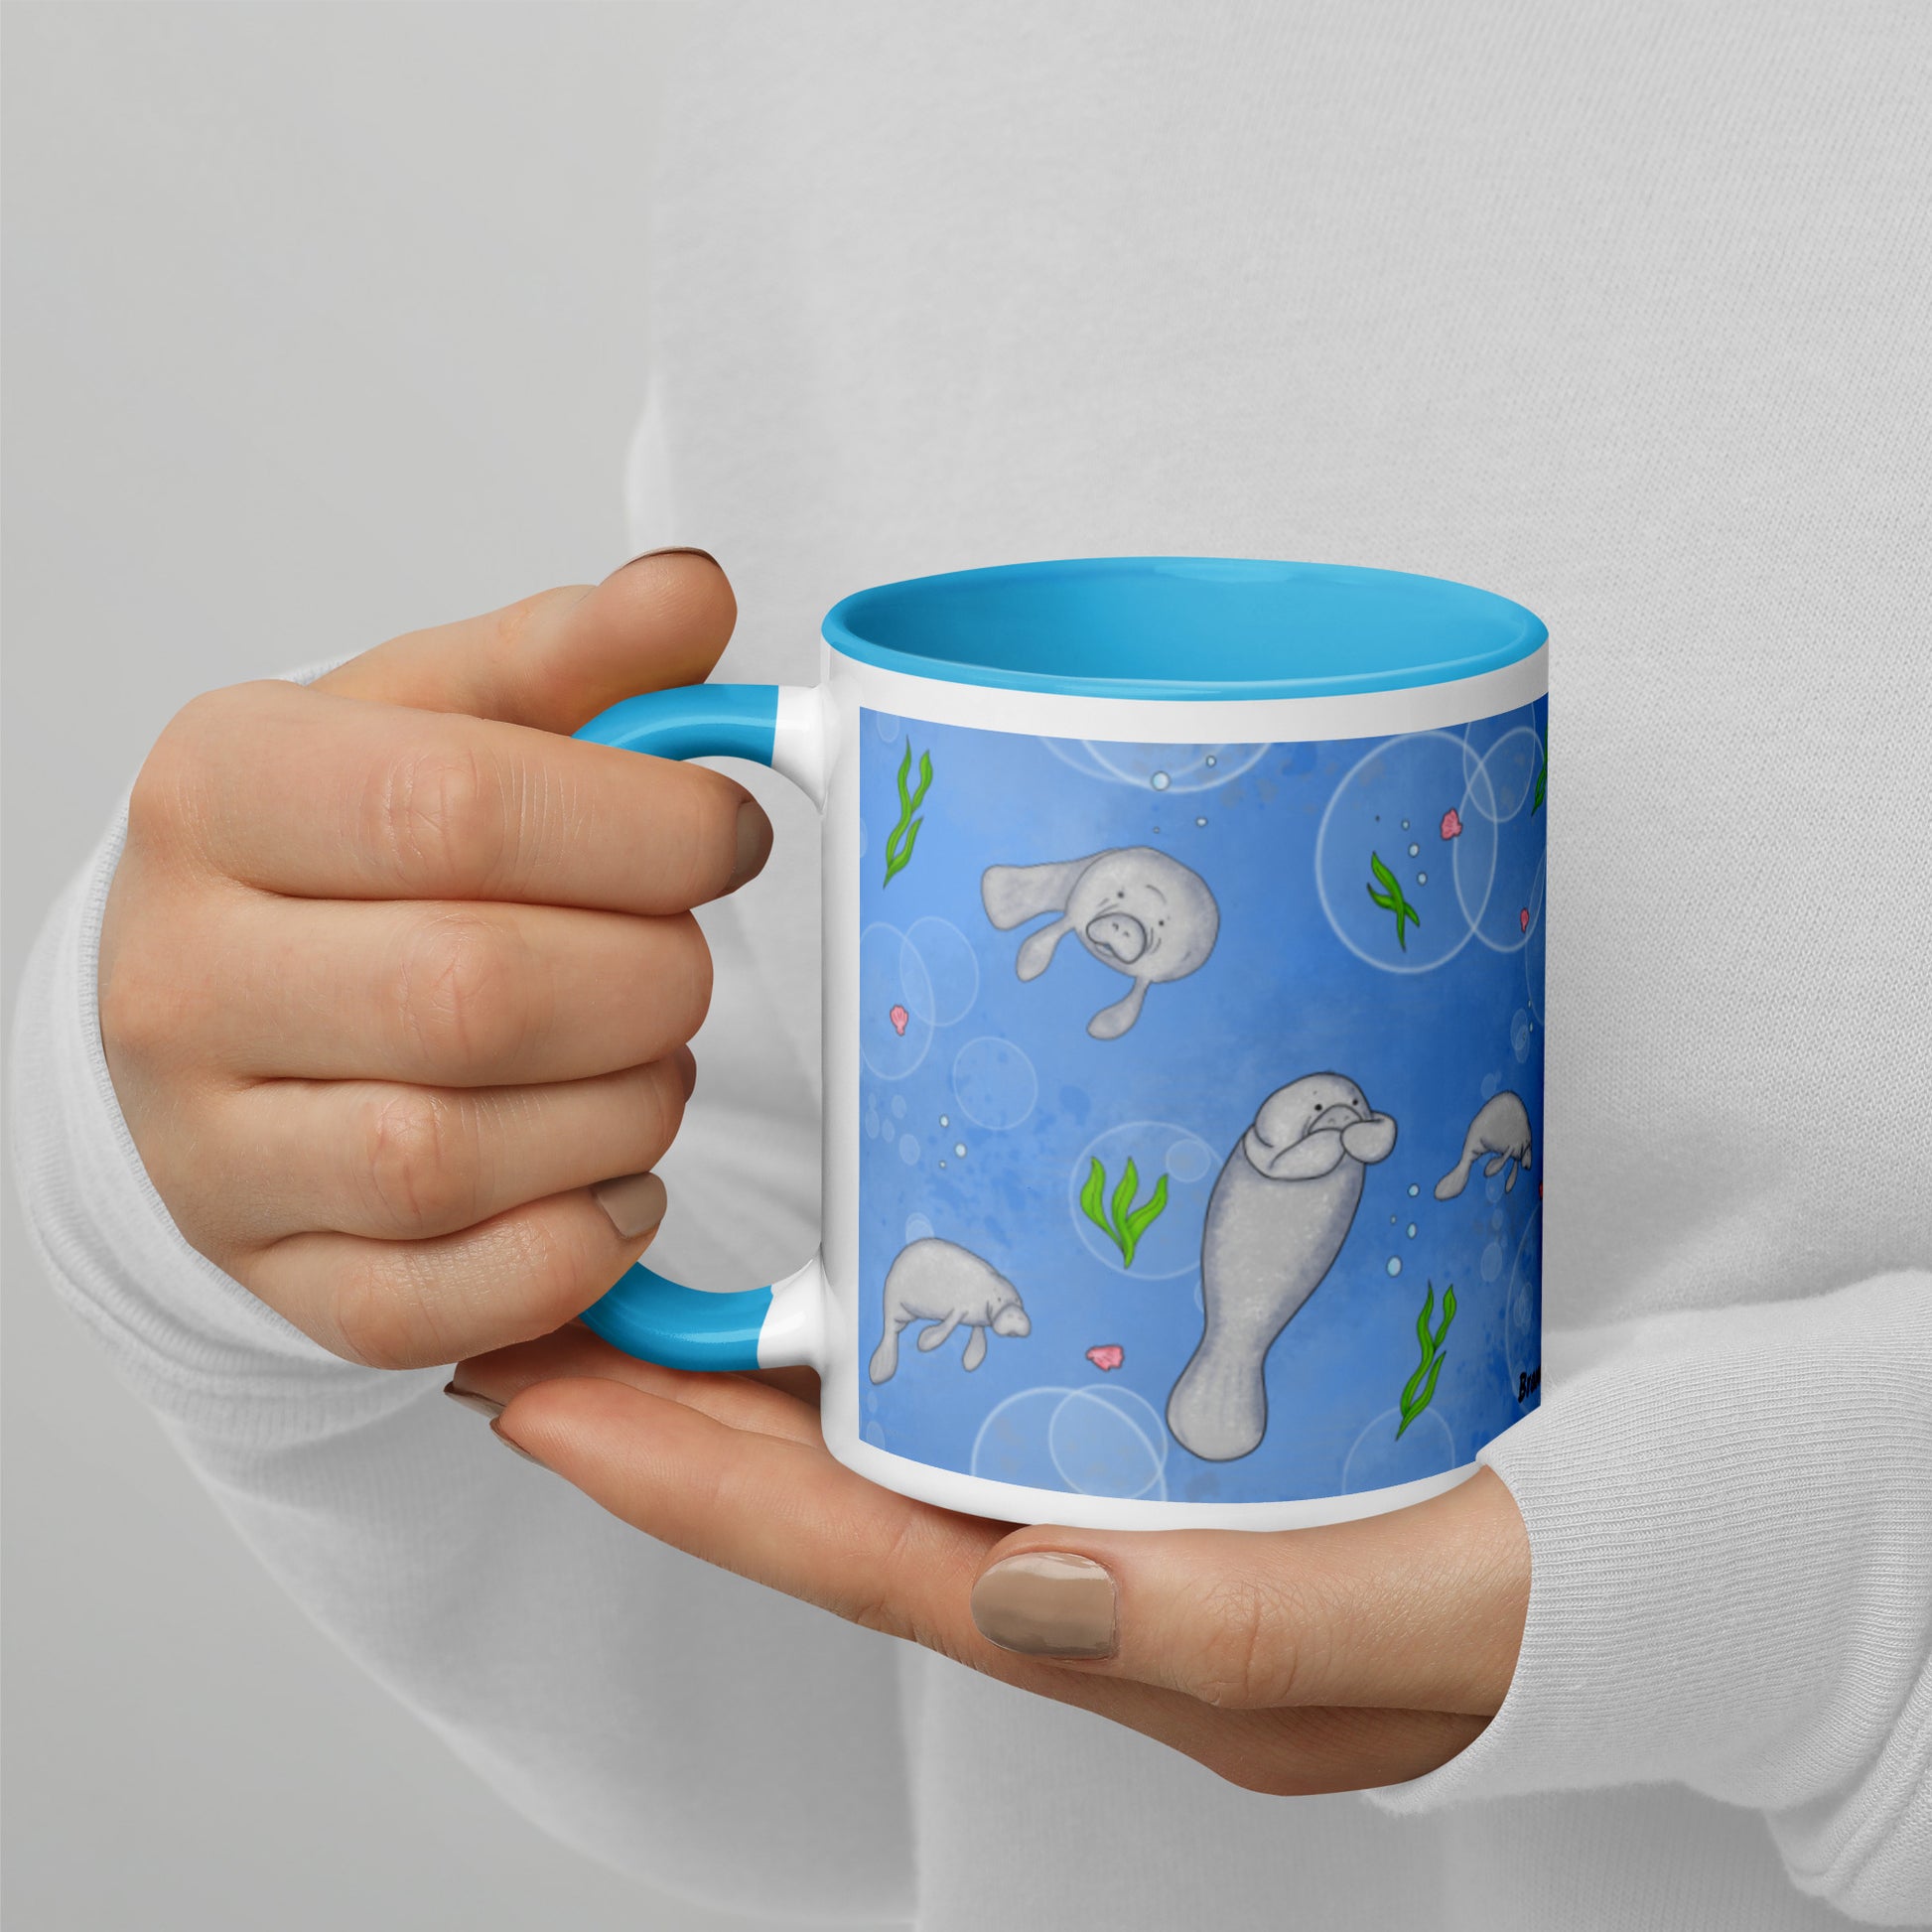 This 11 ounce mug features a wrap-around design of cute manatees, seashells, seaweed and bubbles on a blue background. Has a blue handle, rim, and inside color. This mug is microwave and dishwasher safe.